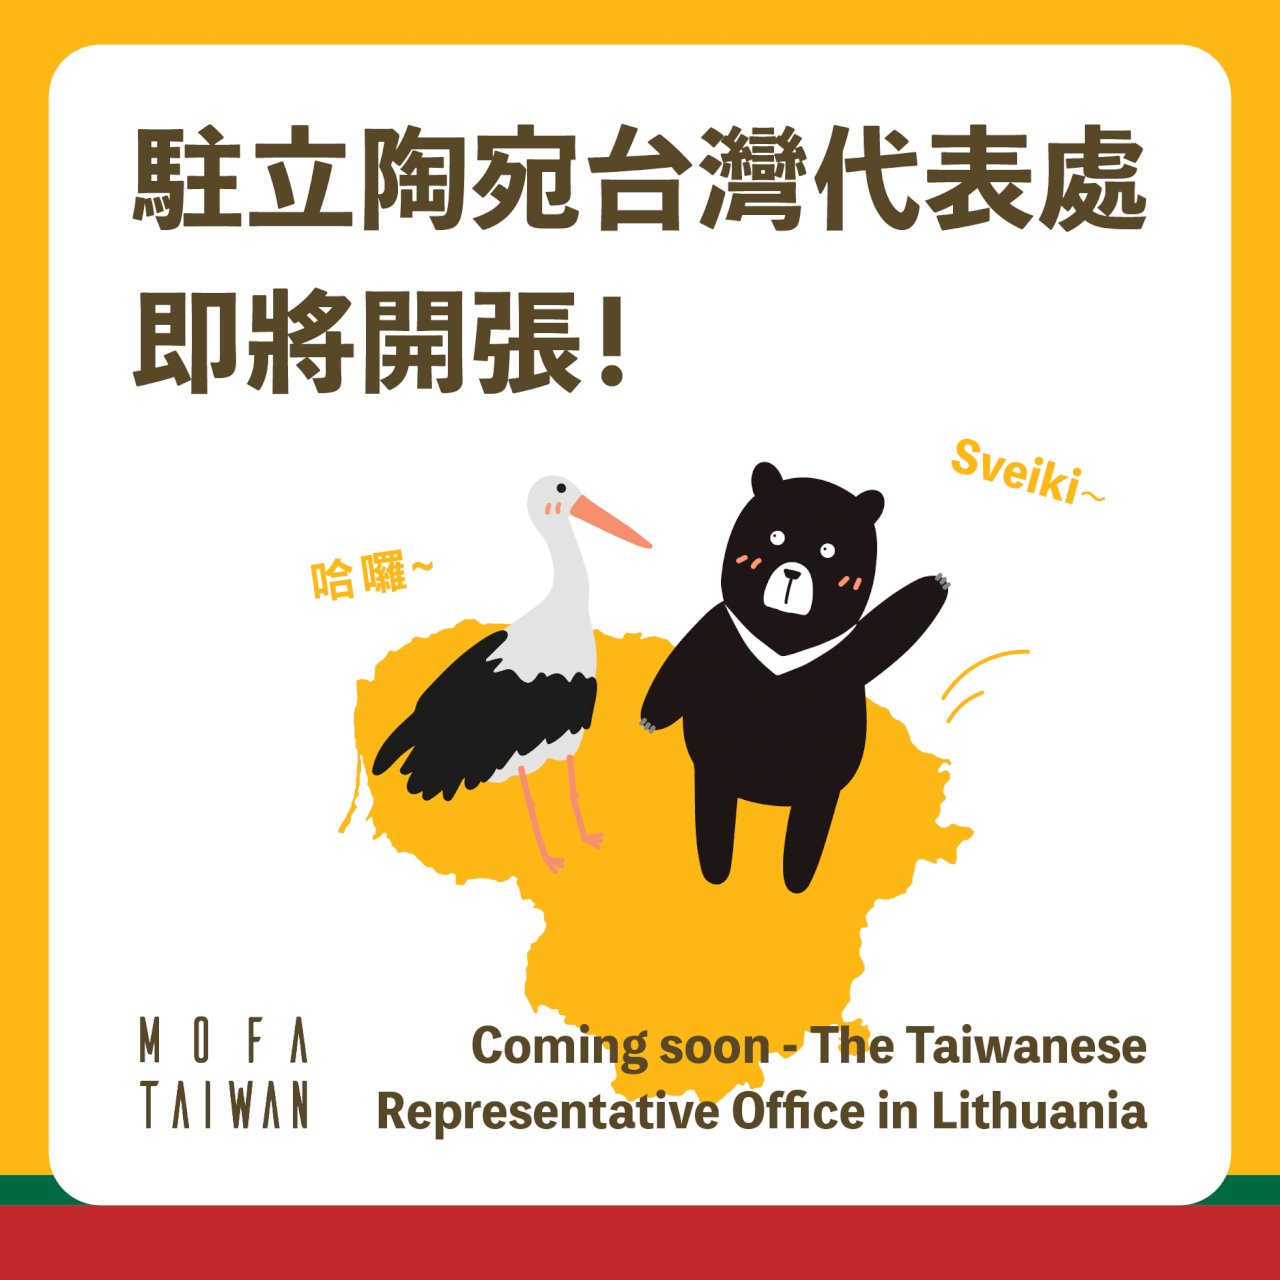 Official: Lithuania’s plans to open Taiwan office going ahead